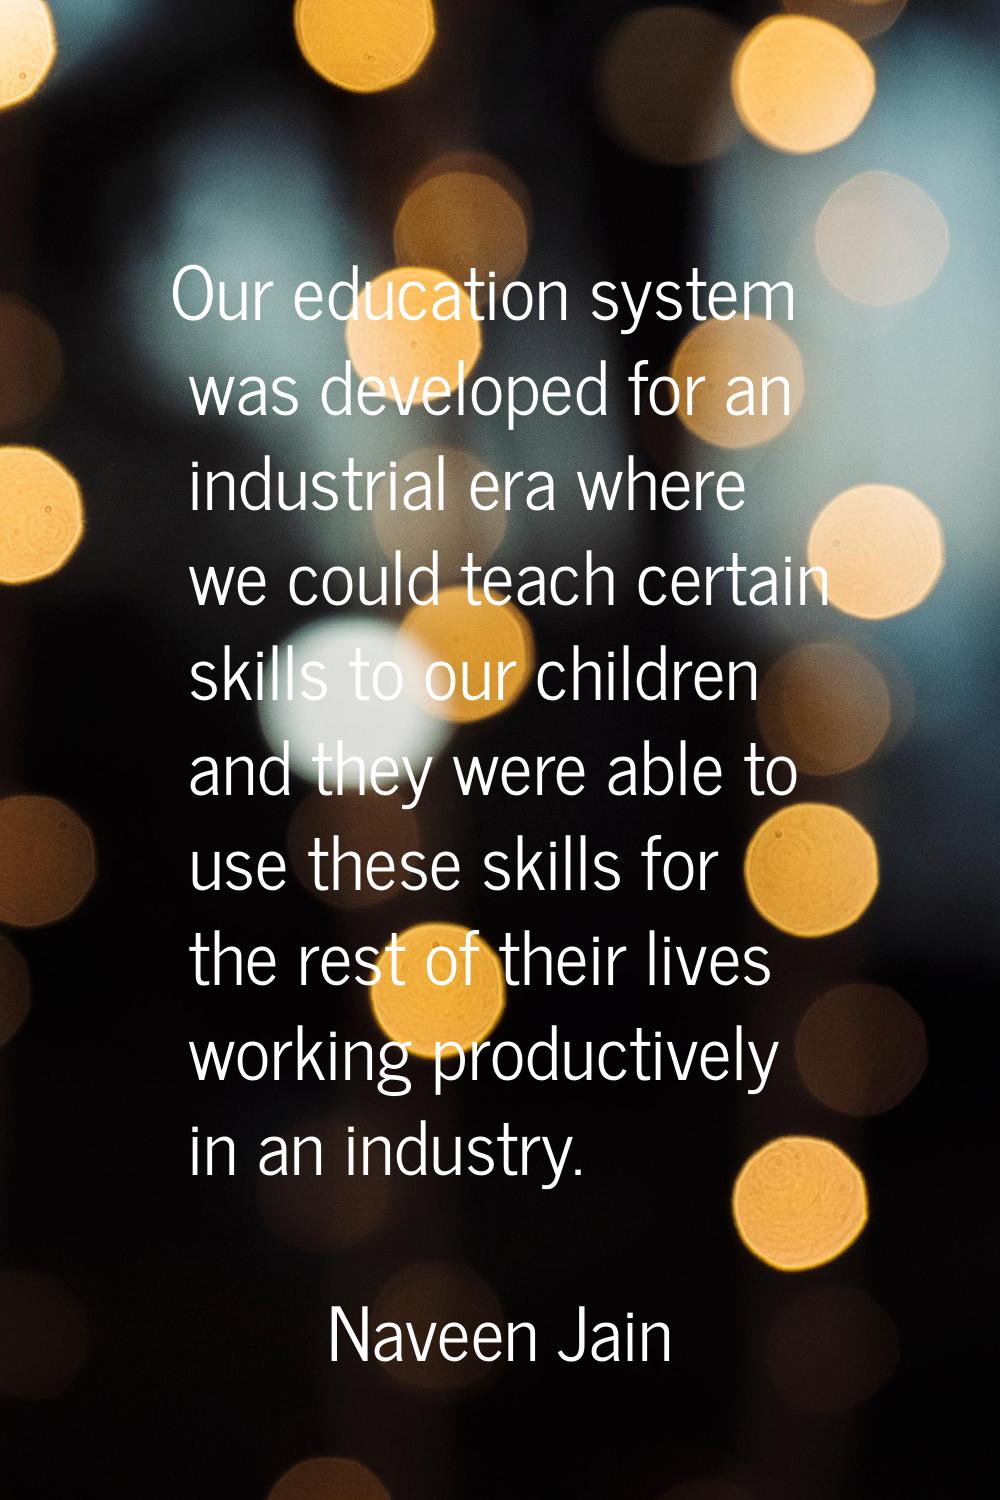 Our education system was developed for an industrial era where we could teach certain skills to our